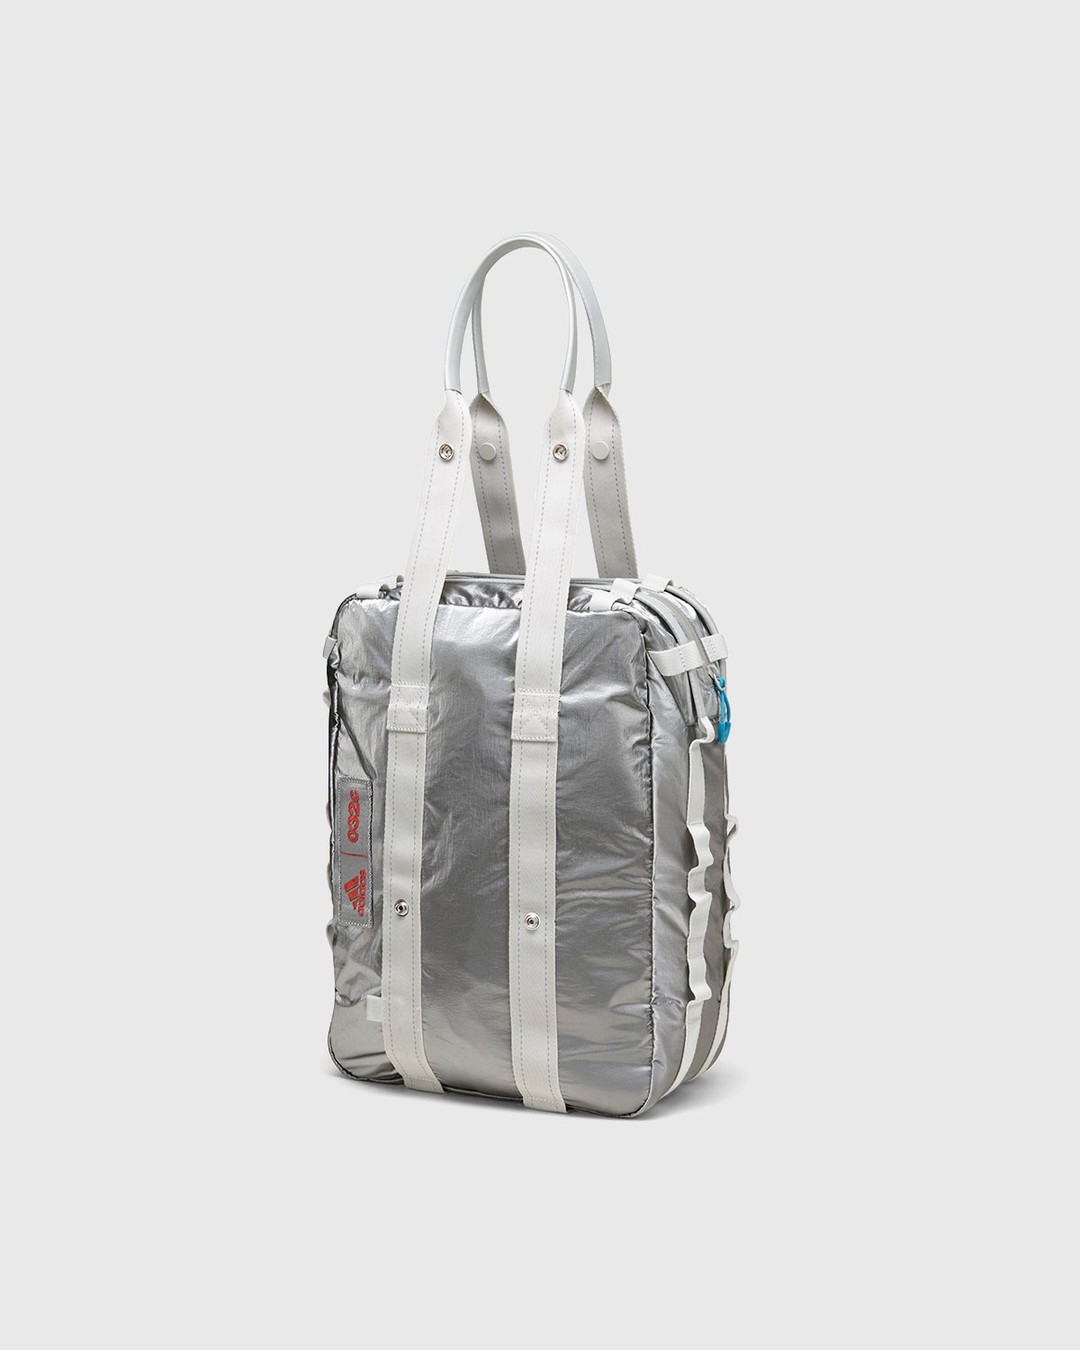 Adidas x 032c – Tote Greone - Bags - White - Image 2